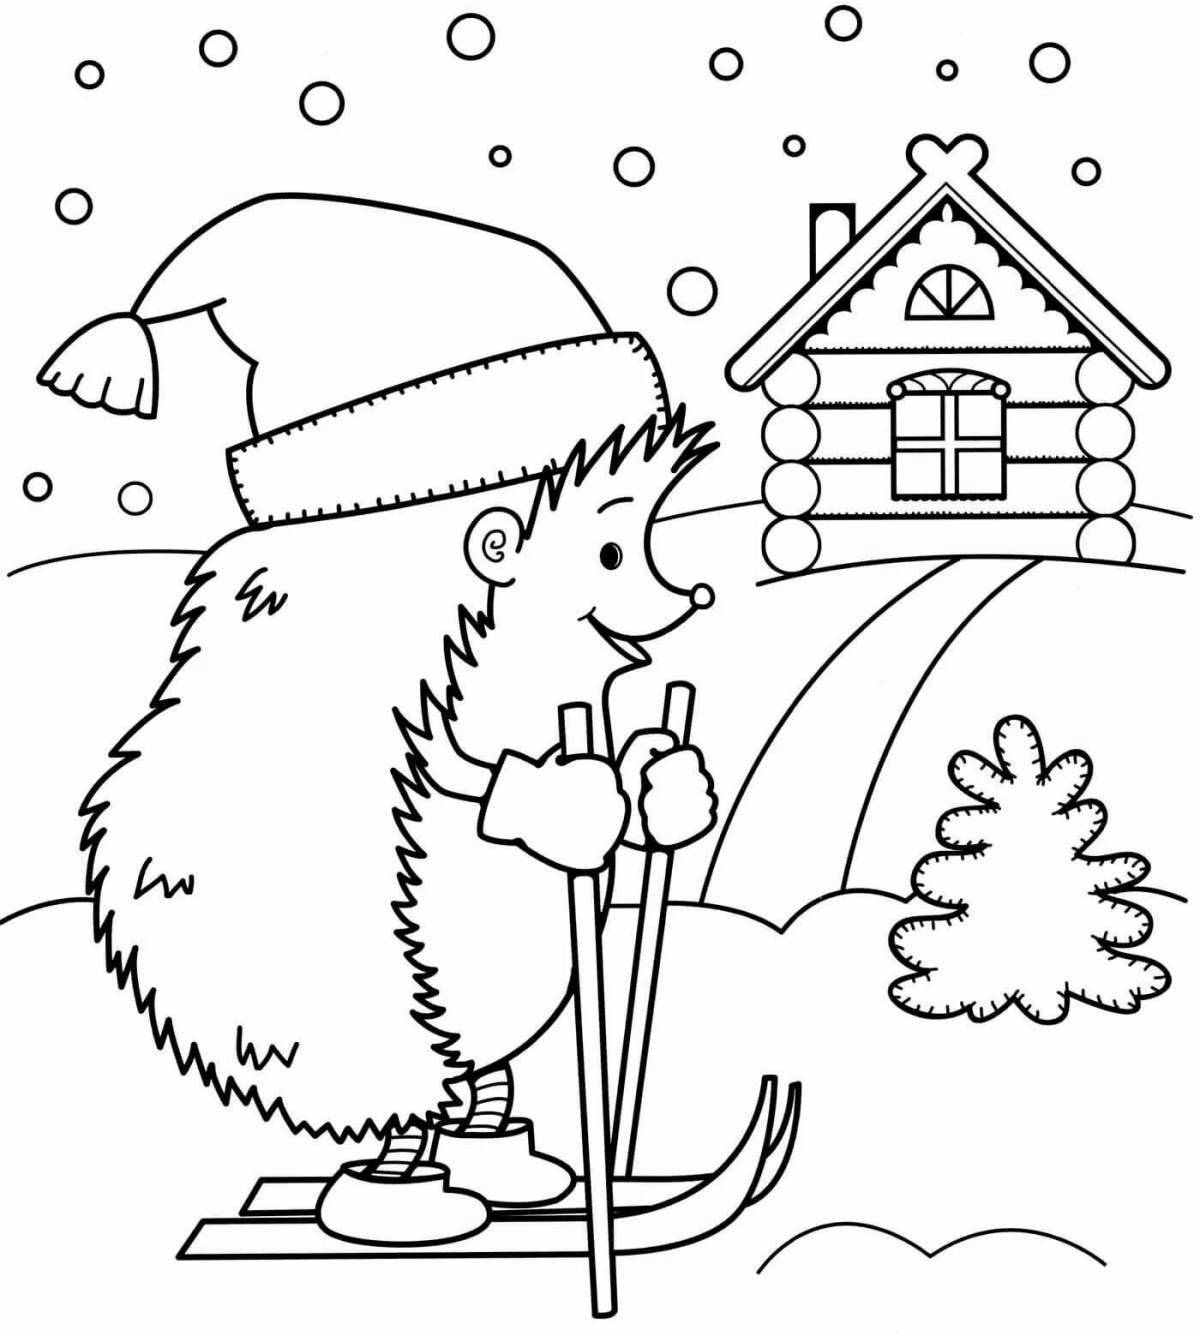 Wonderful winter coloring for children 3-4 years old